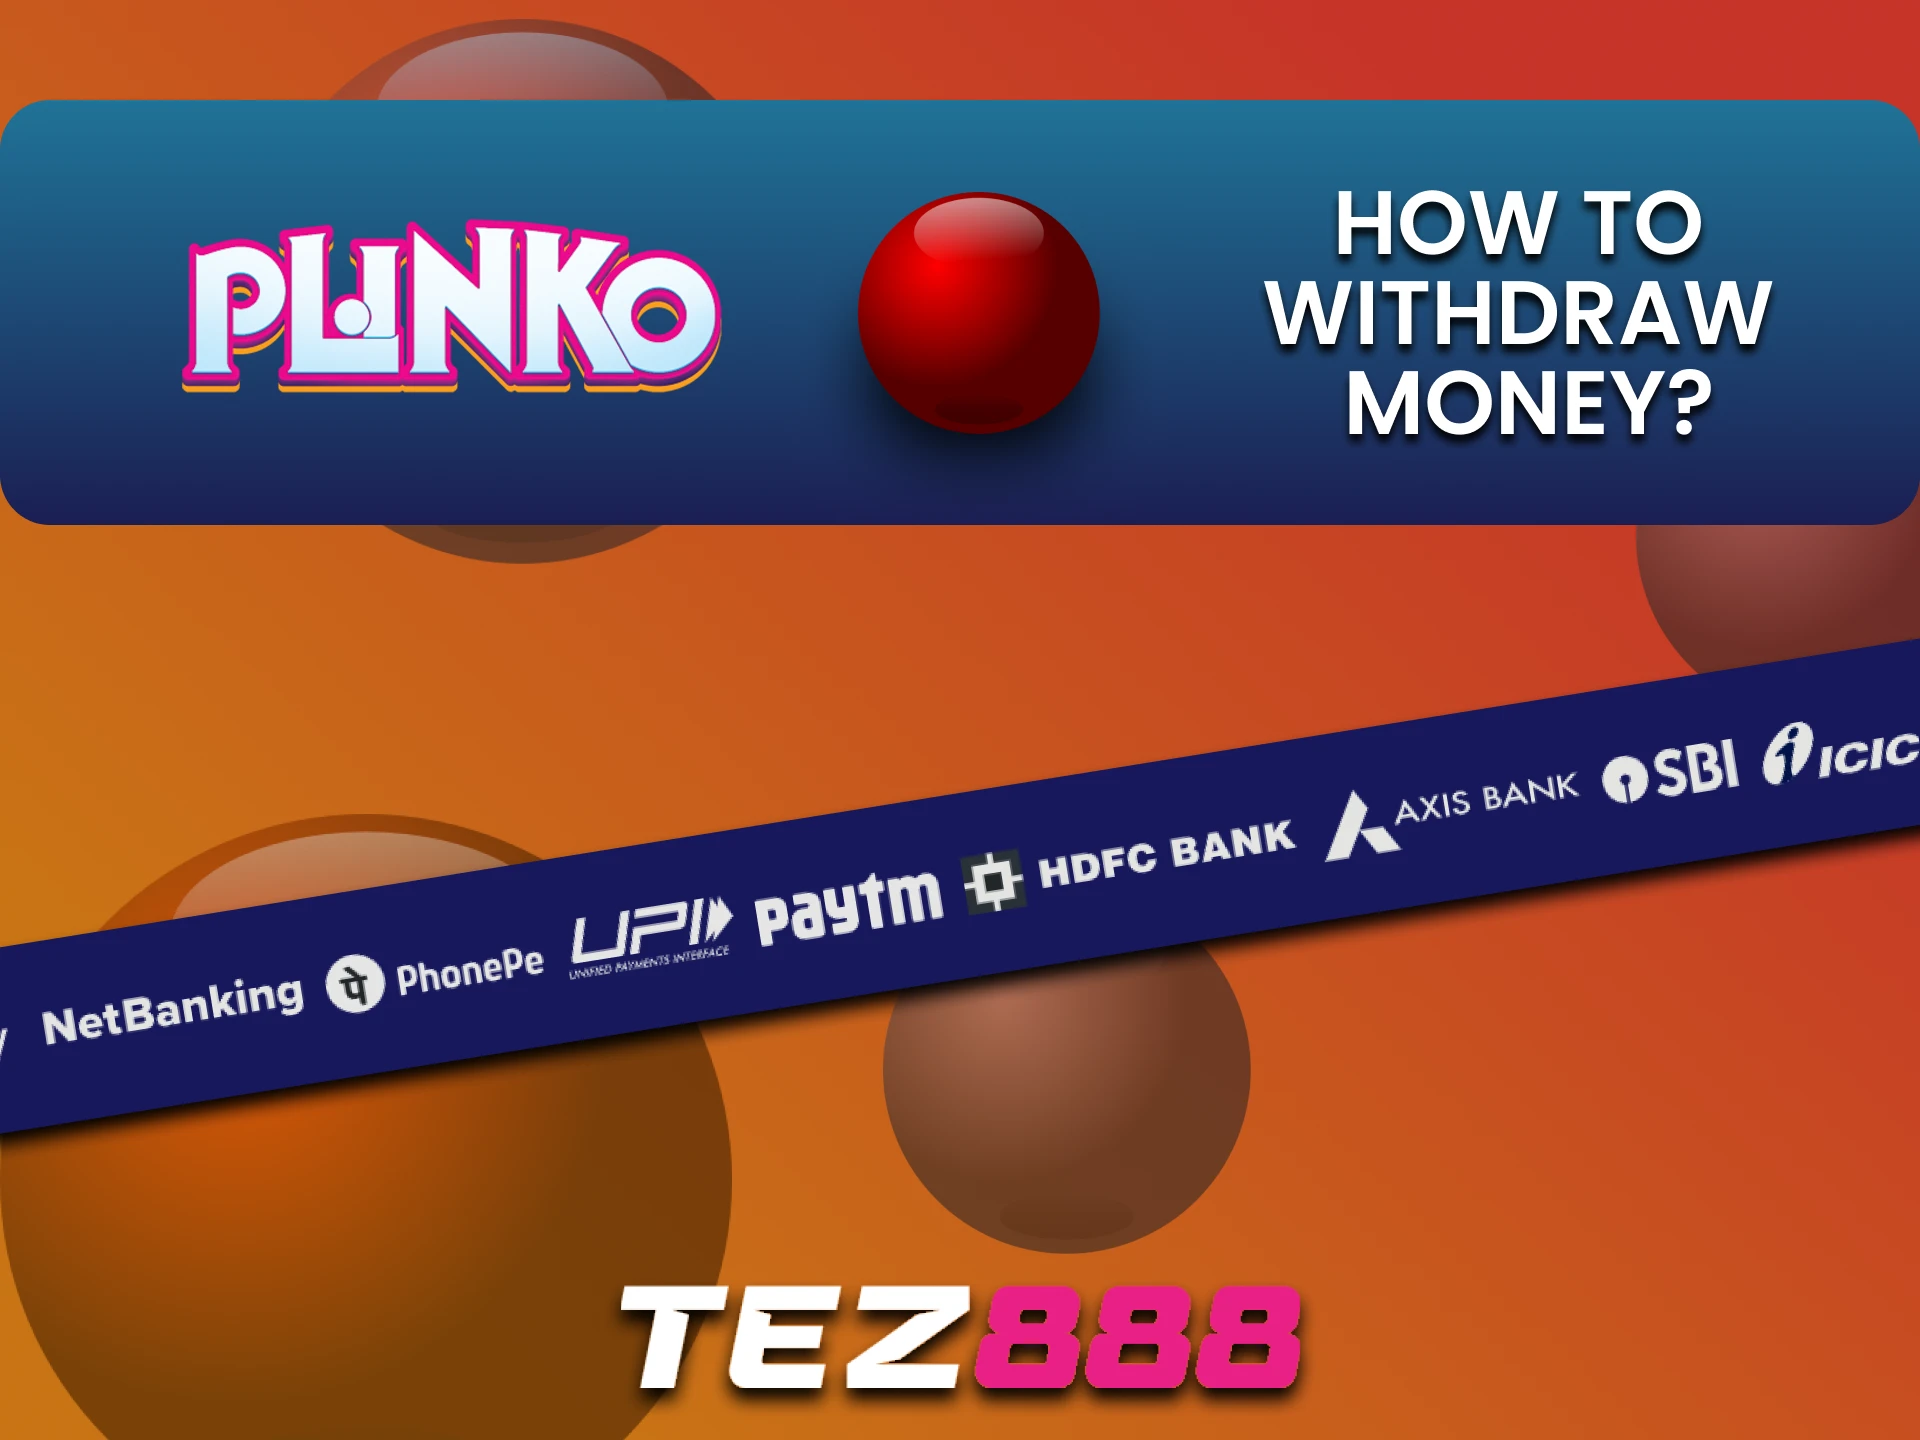 Learn how to withdraw funds on the Tez888 website for the game Plinko.